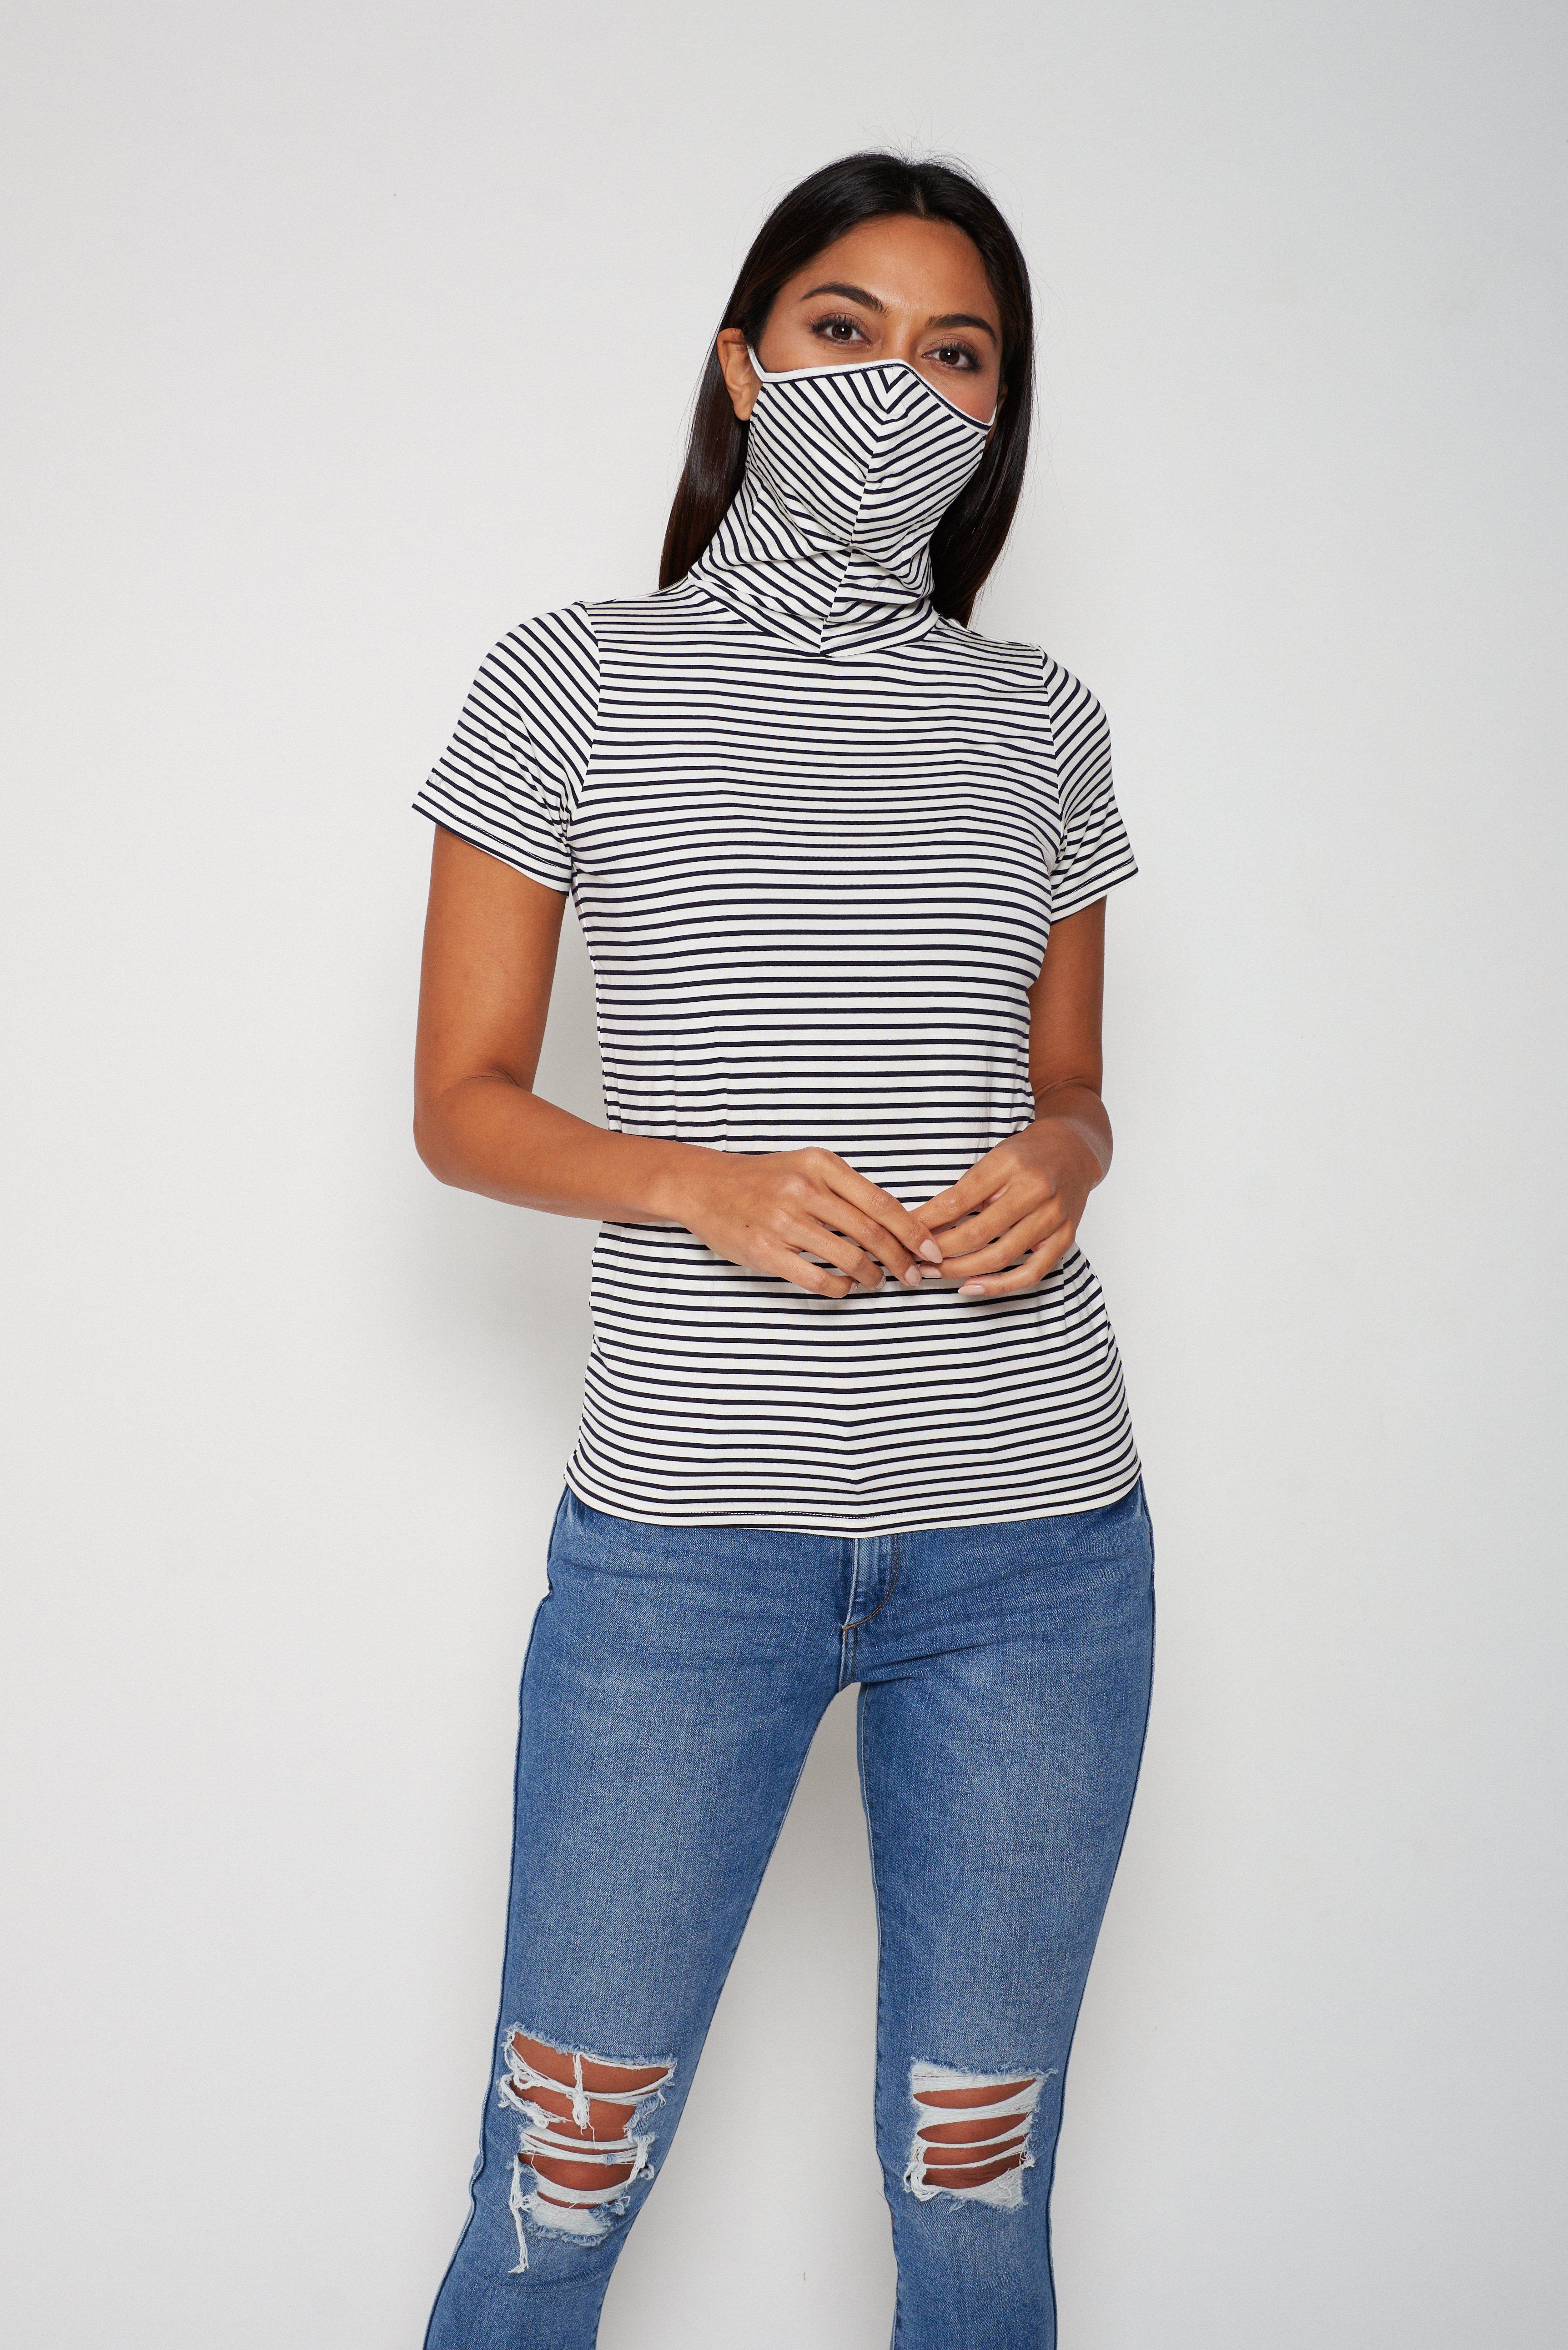 Adult Short Sleeve Navy Stripe Shmask™ Earloop Face Mask for Kids and Adults